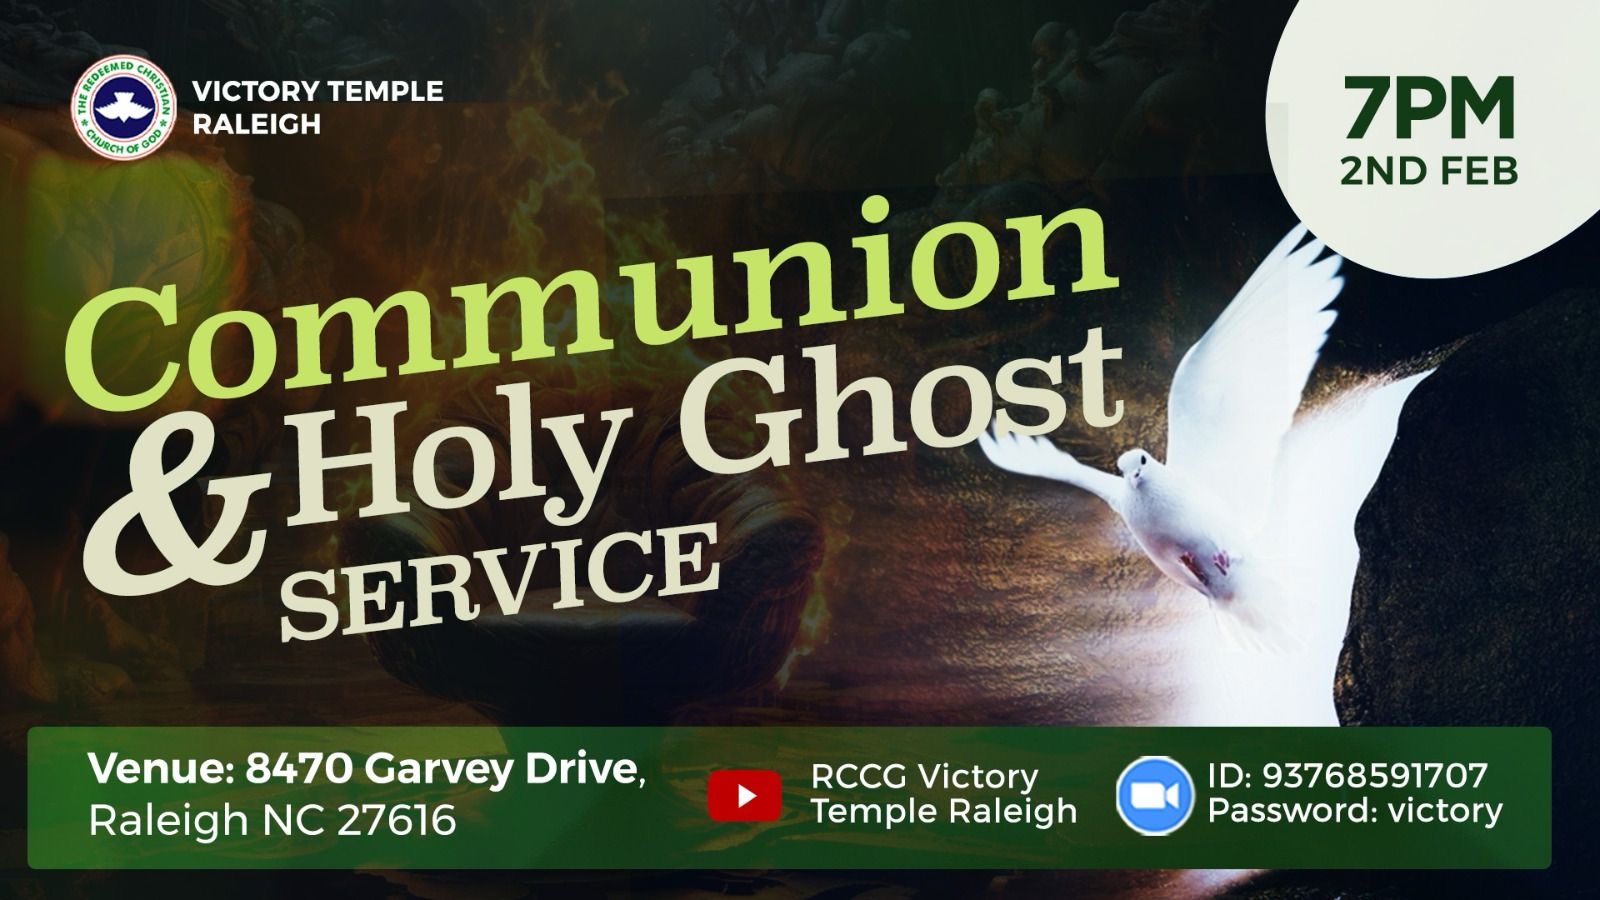 rccg communion and holyghost service banner